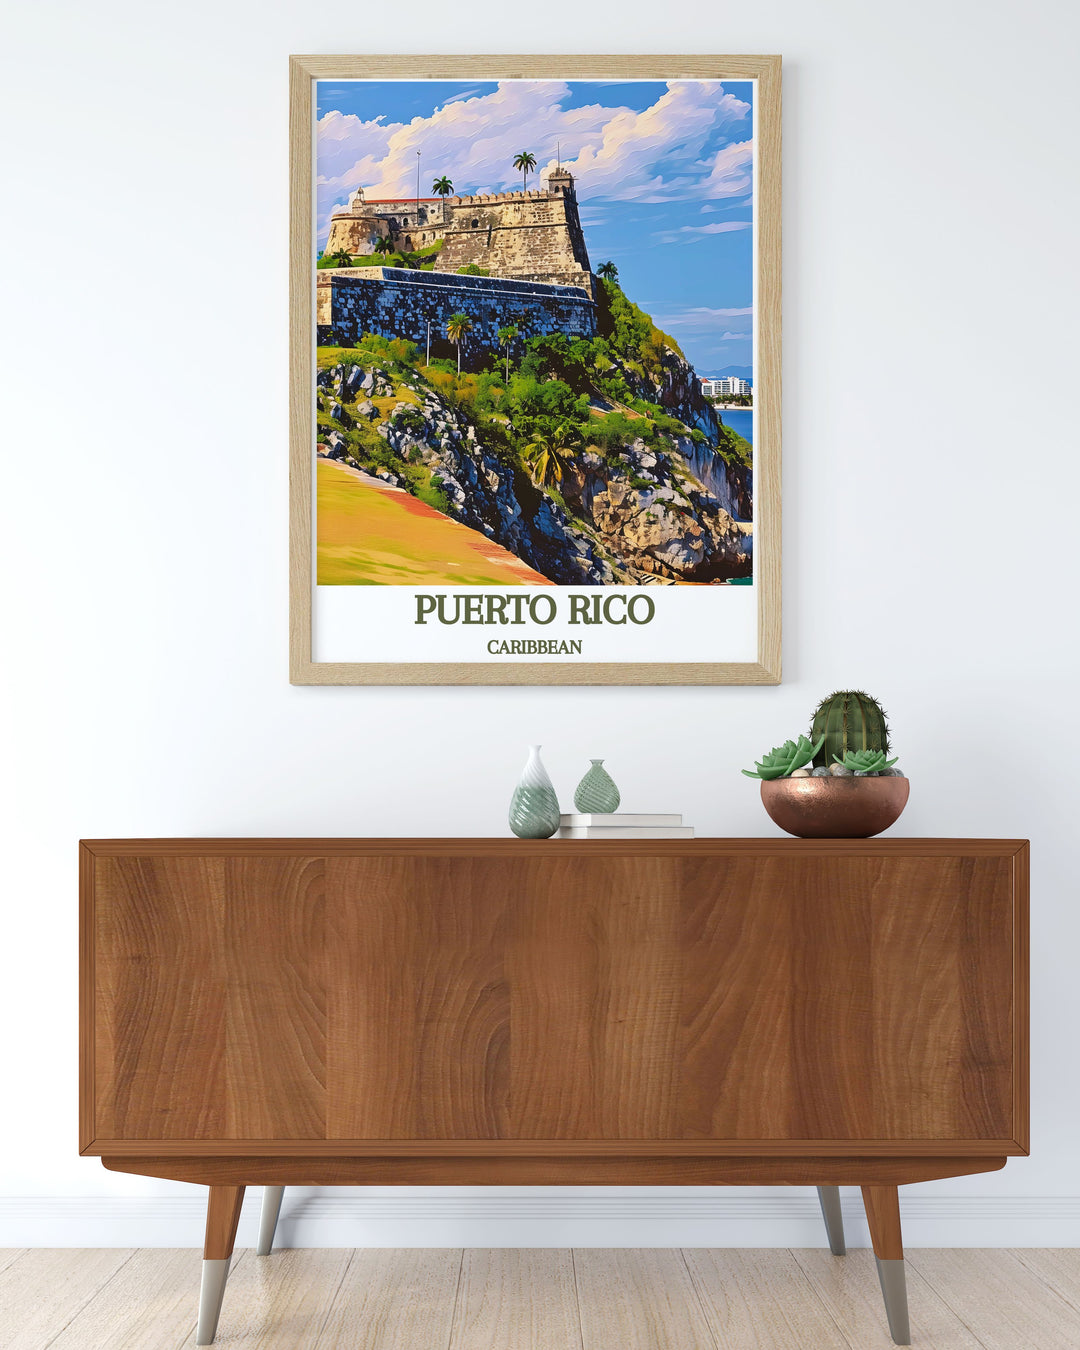 Unique Arecibo wall art featuring the historic CARIBBEAN, Castillo San Felipe del Morro. This travel poster print captures the essence of Puerto Ricos culture and landscape, making it a perfect addition to any art collection or as a special gift.